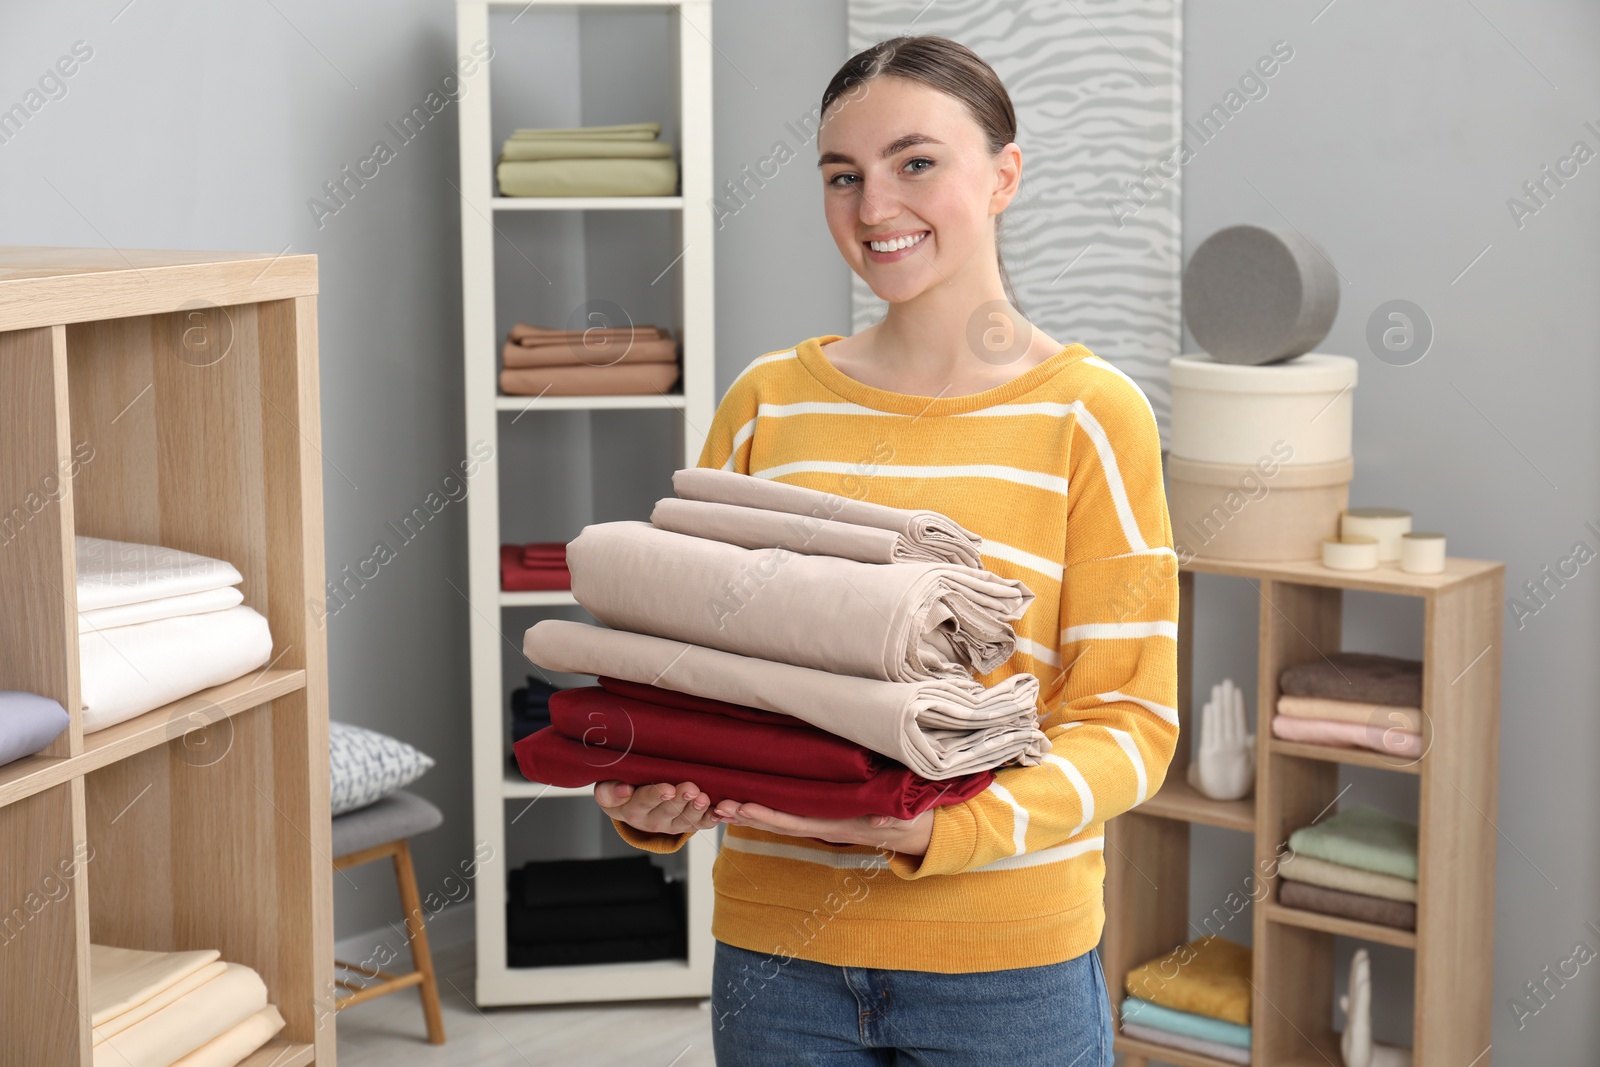 Photo of Smiling young woman with stack of bed linens in shop